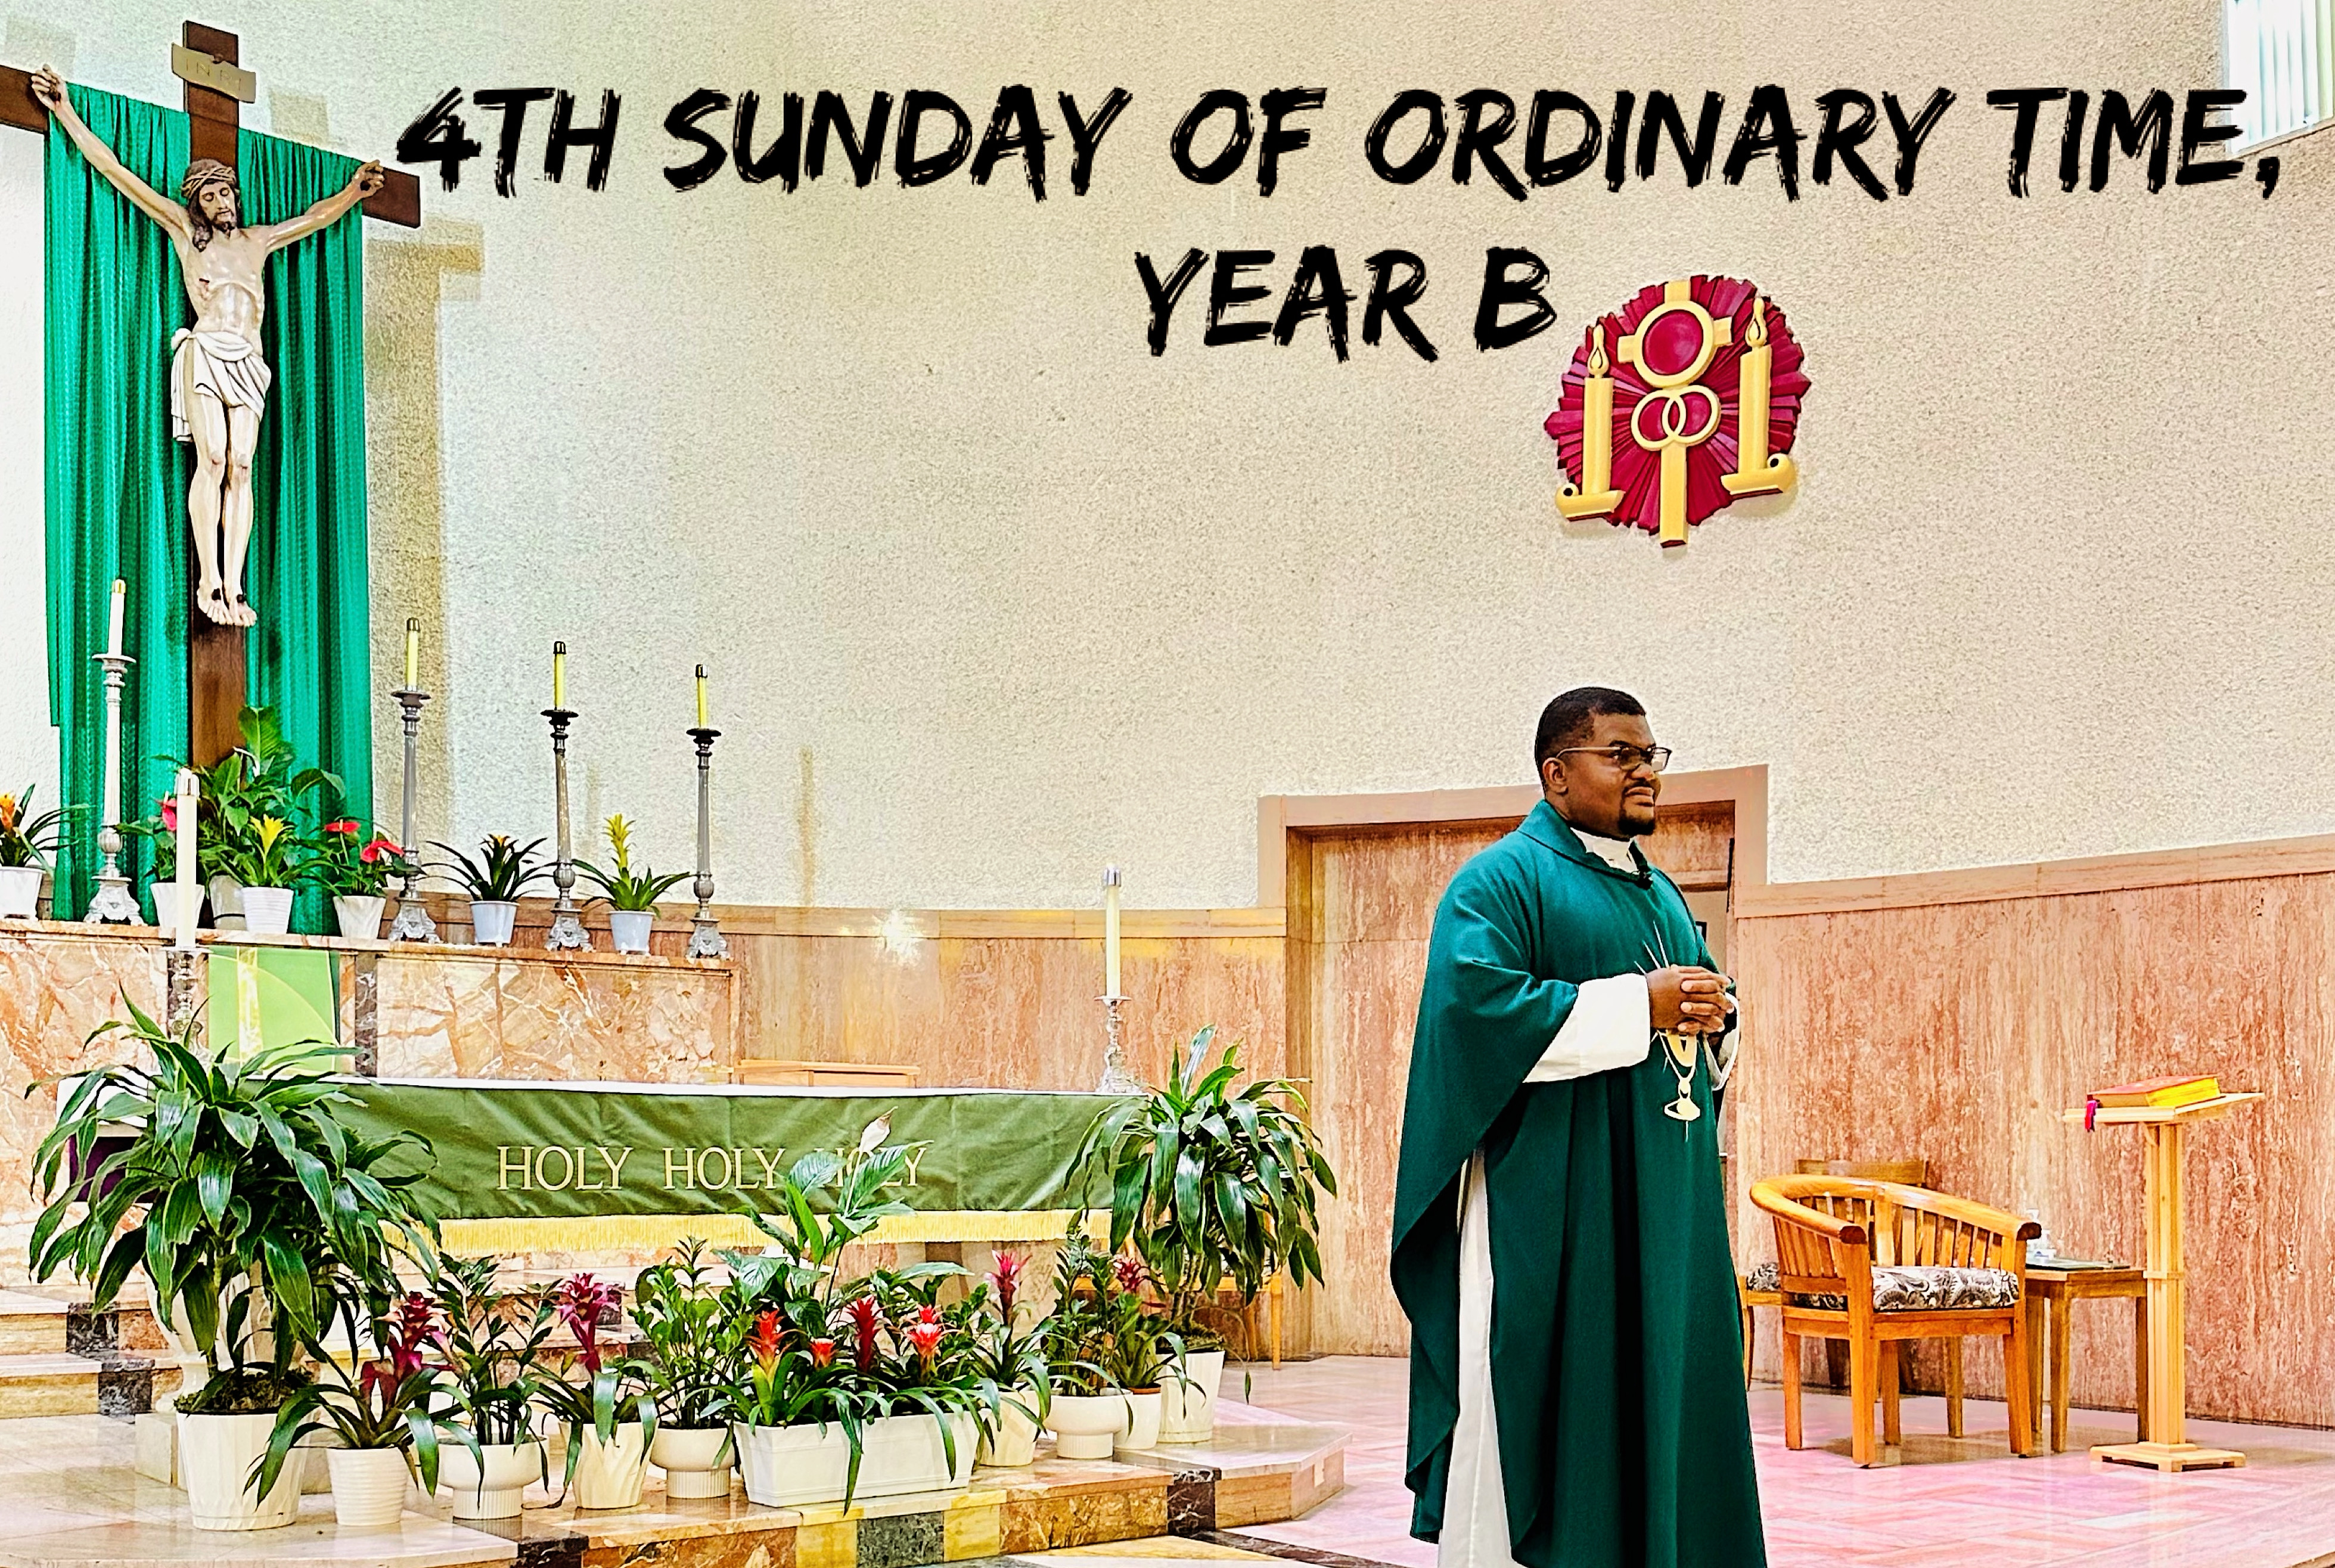 4th Sunday of Ordinary Time, Year B